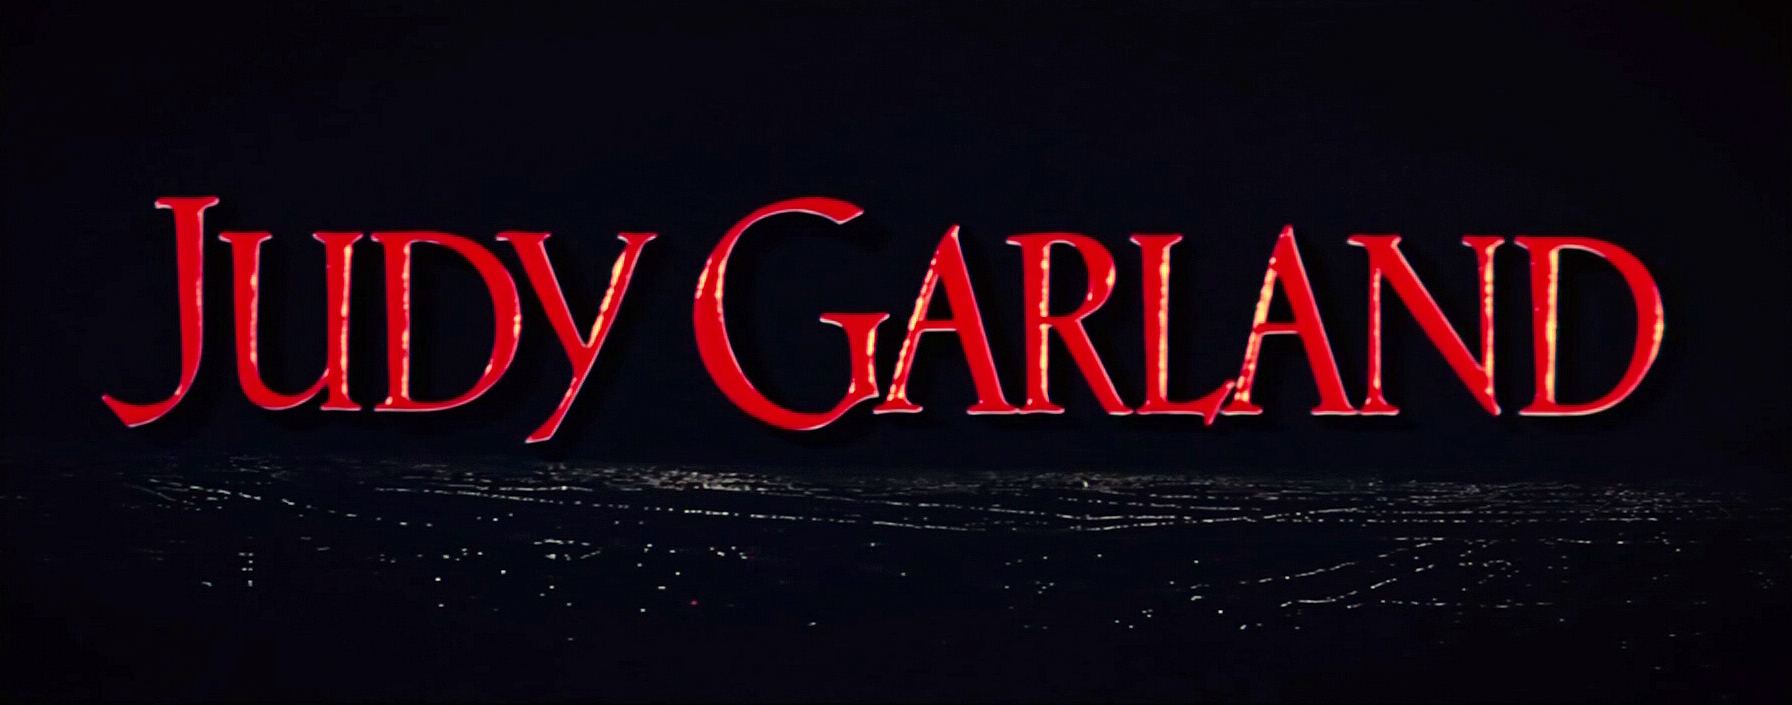 Main title from A Star Is Born (1954) (2). Judy Garland